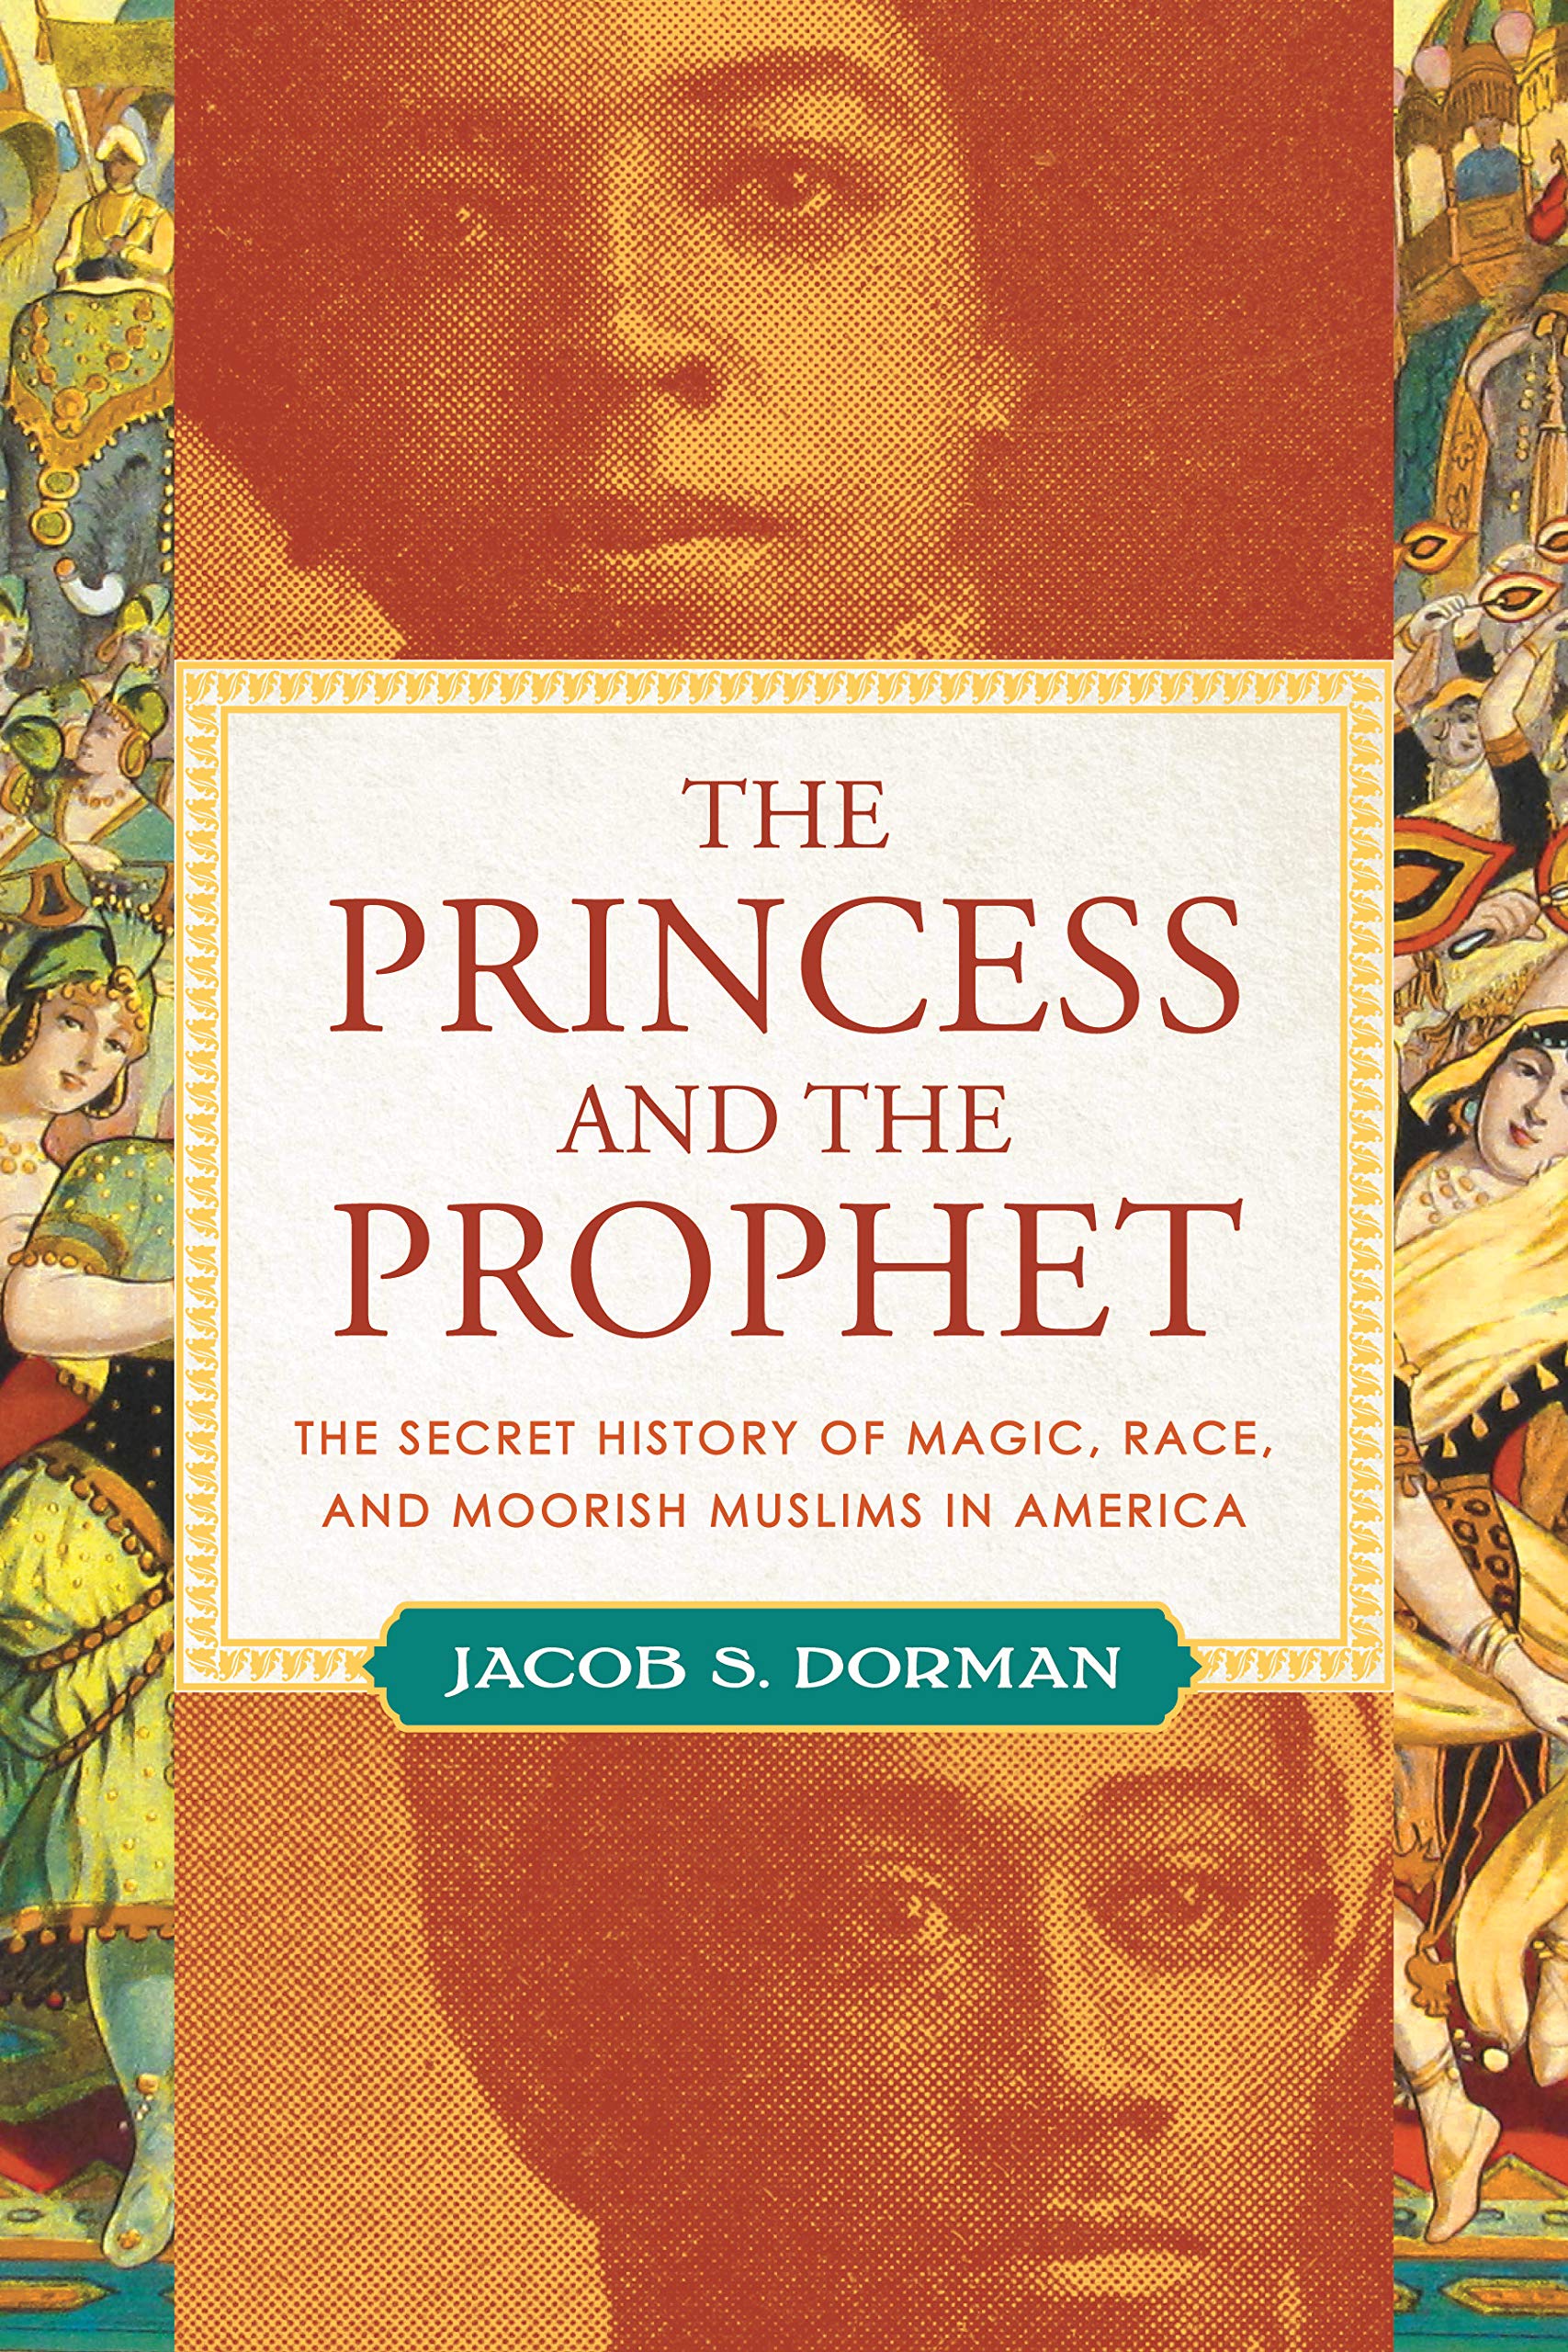 Cover of Jacob Dormanʹs ʺThe Princess and the Prophetʺ (published by Beacon Press)